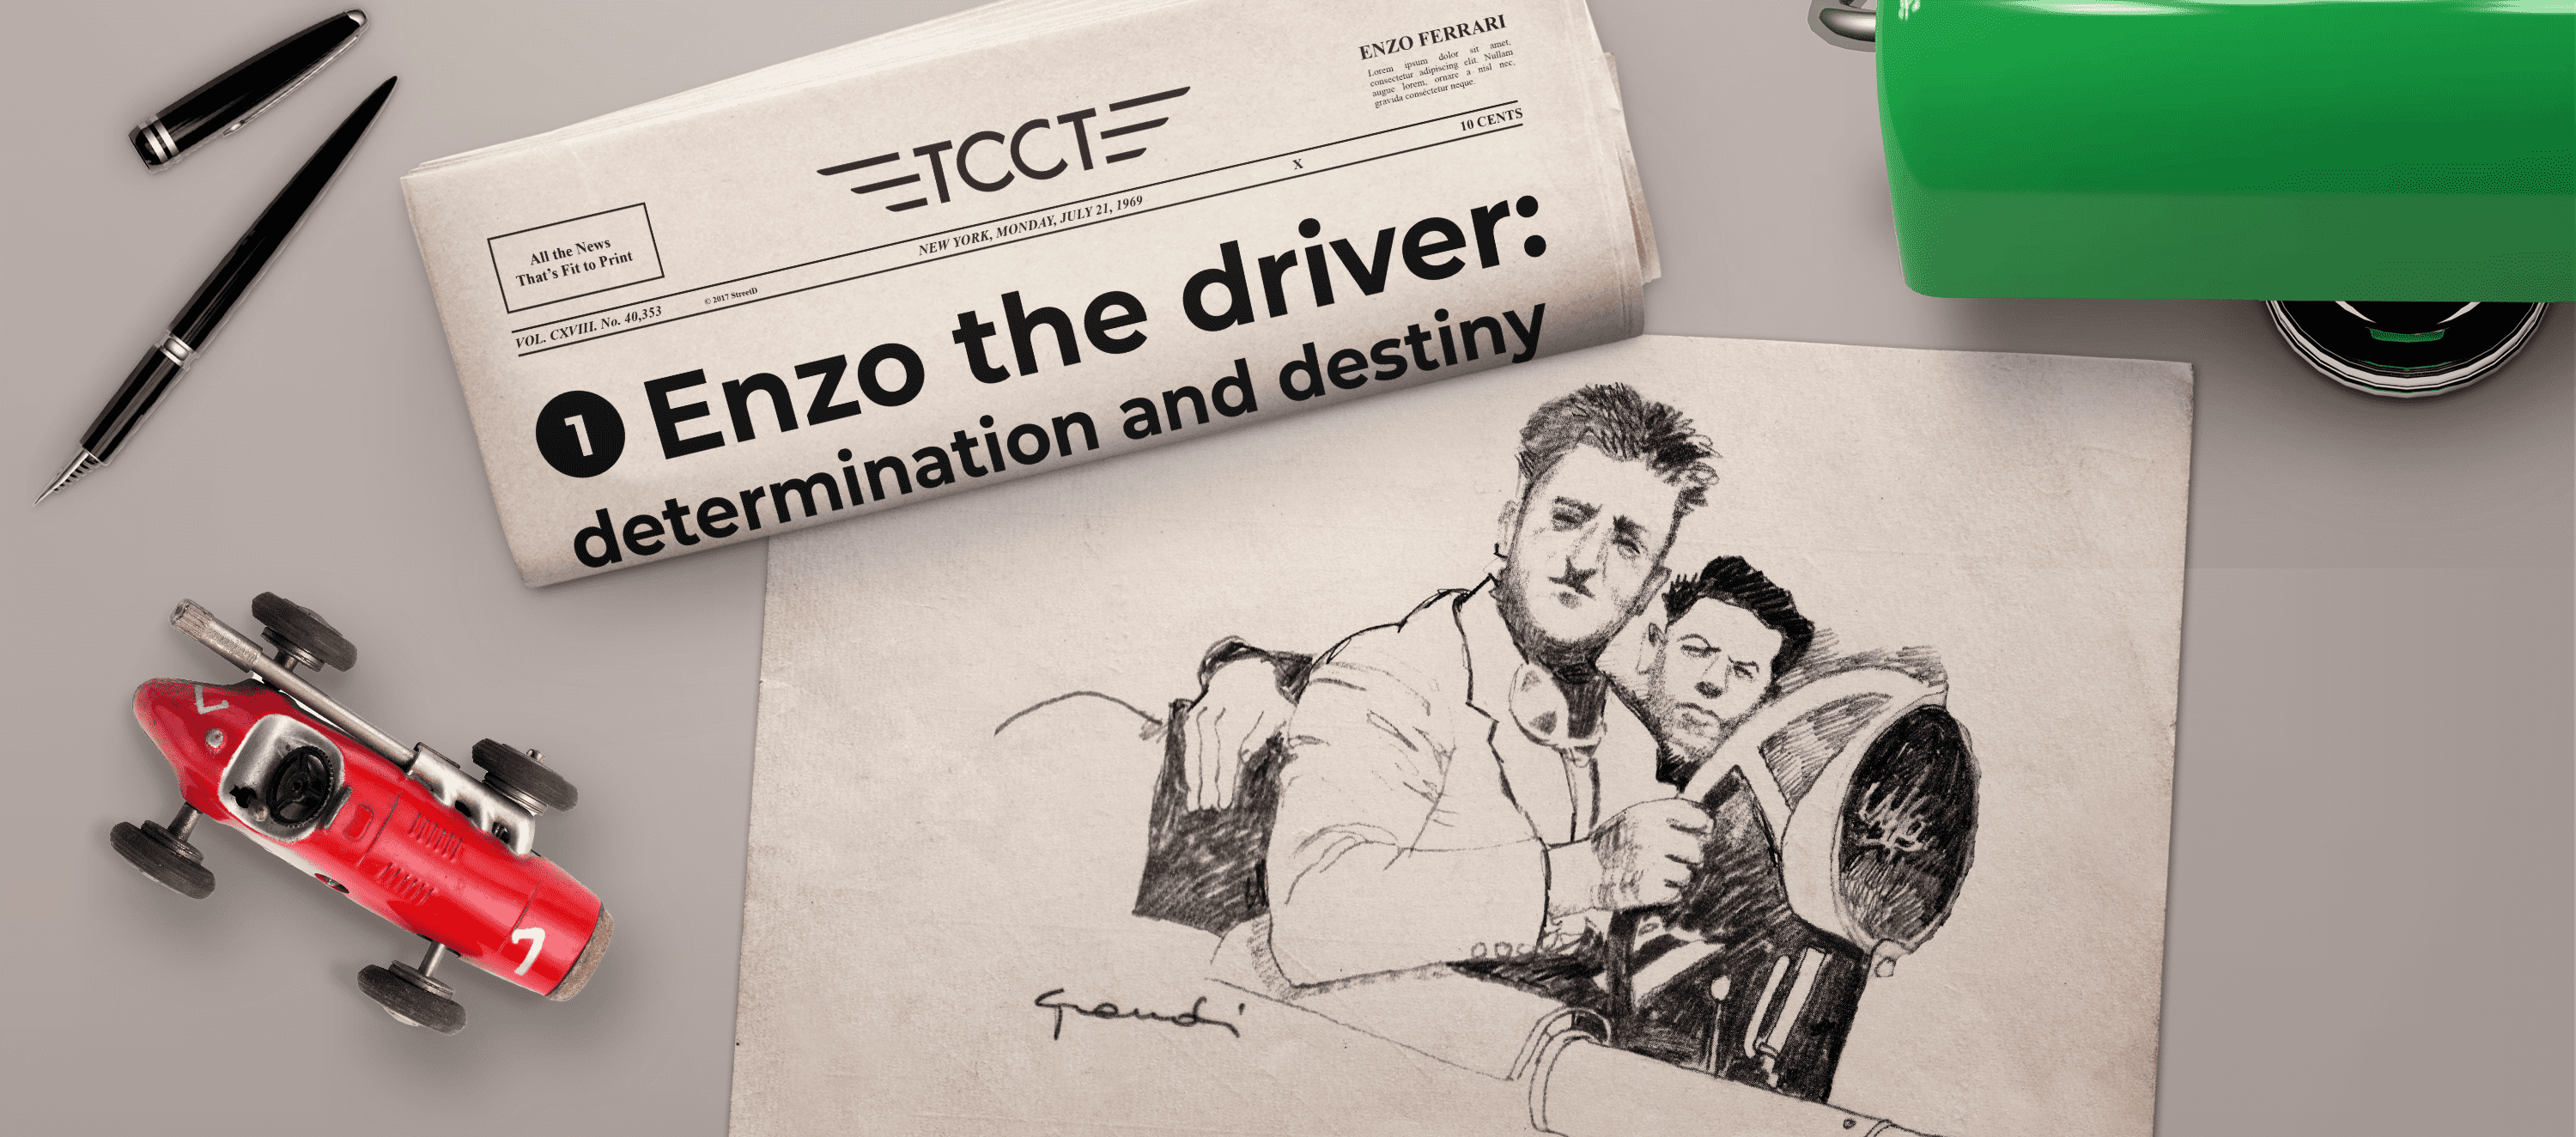 Enzo the driver: determination and destiny image